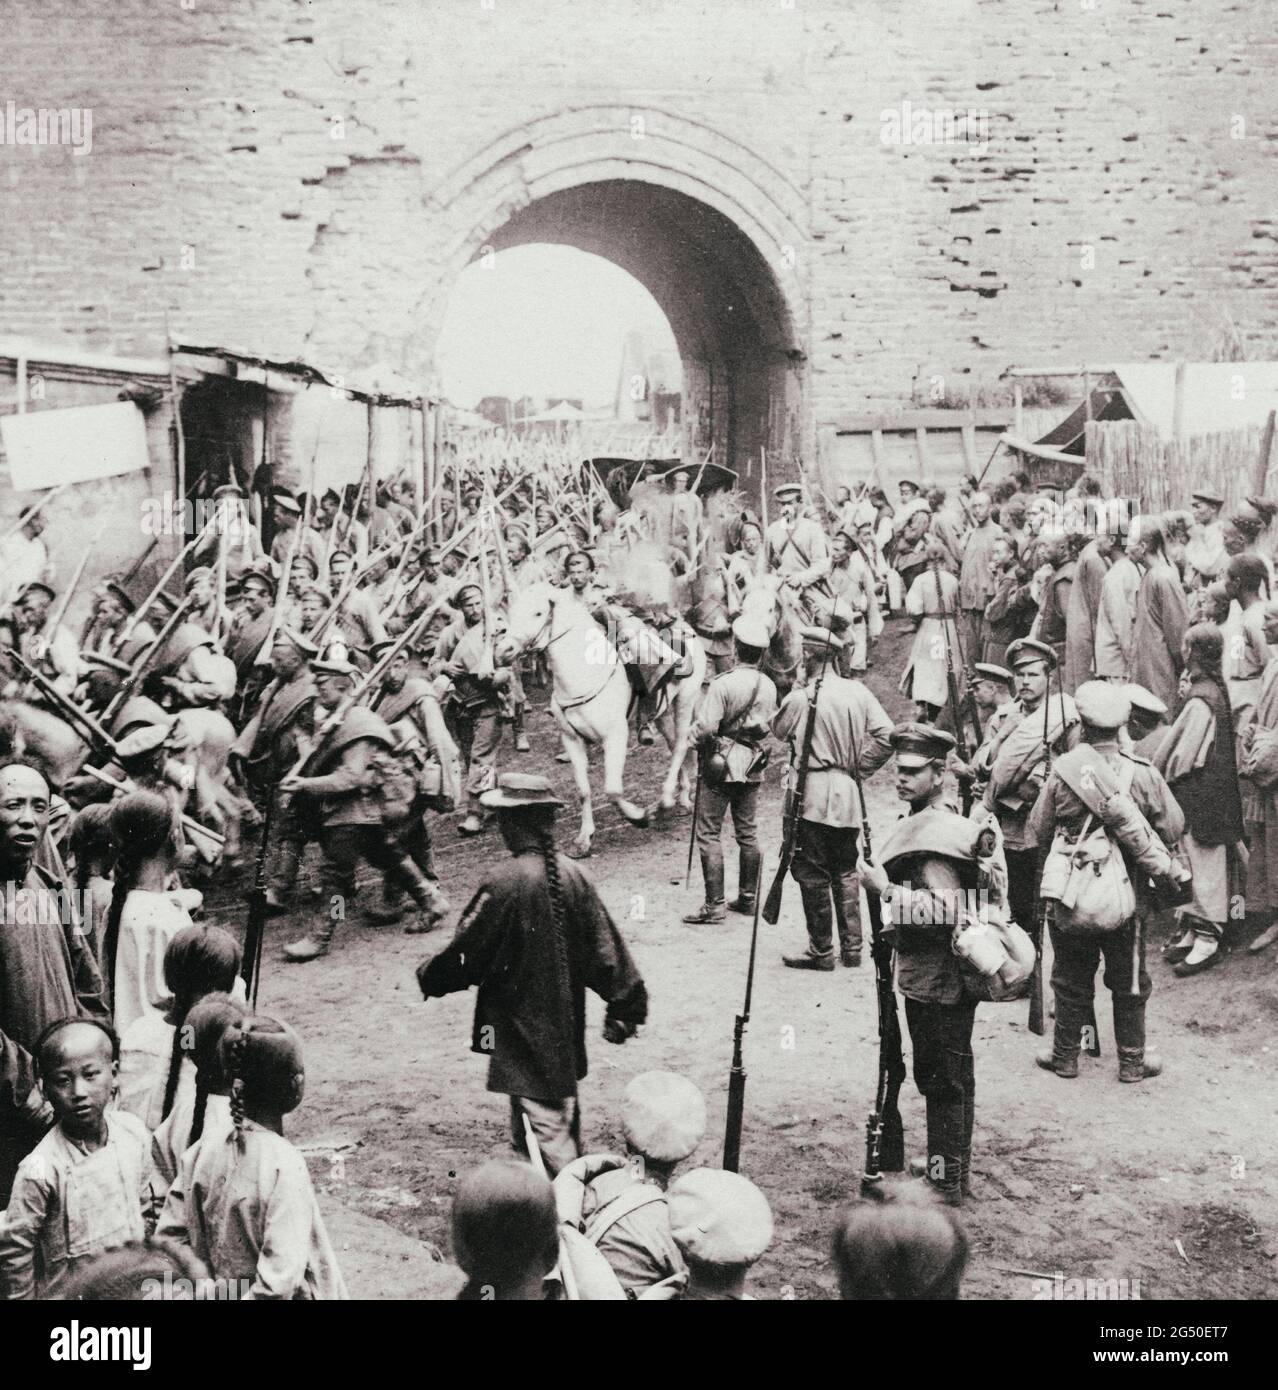 Soldiers of the Russian empire passing through the gates of Mukden, Manchuria. 1905. Russo-Japanese War Stock Photo